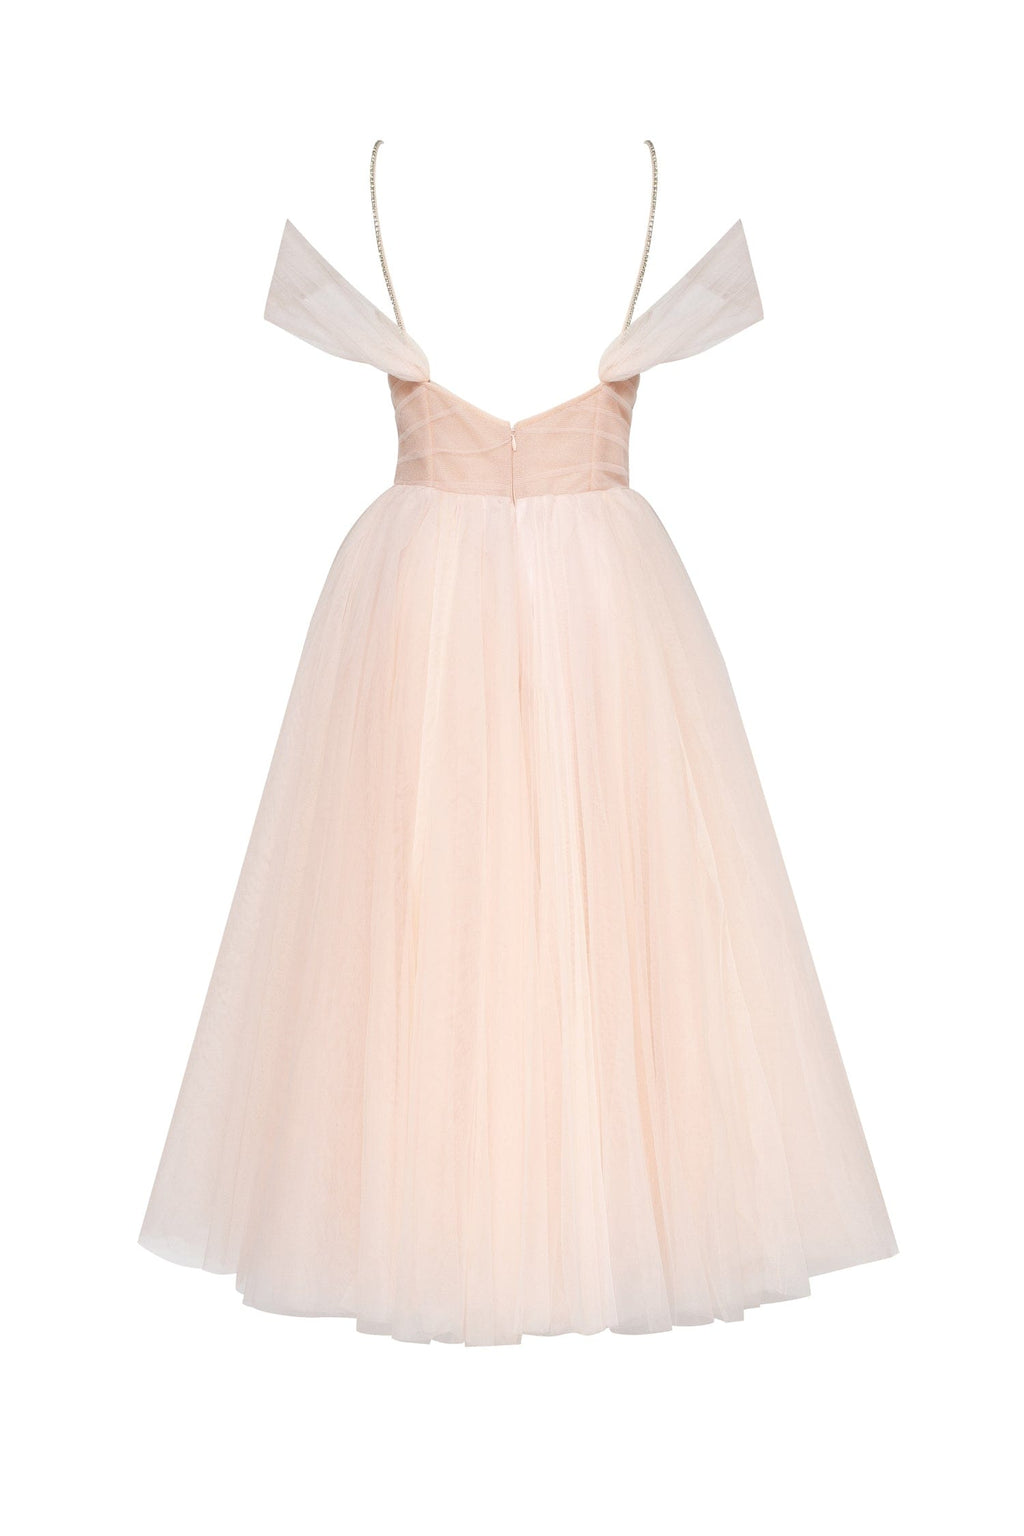 Feminine tulle cocktail dress with the light off-the-shoulder sleeves - Milla